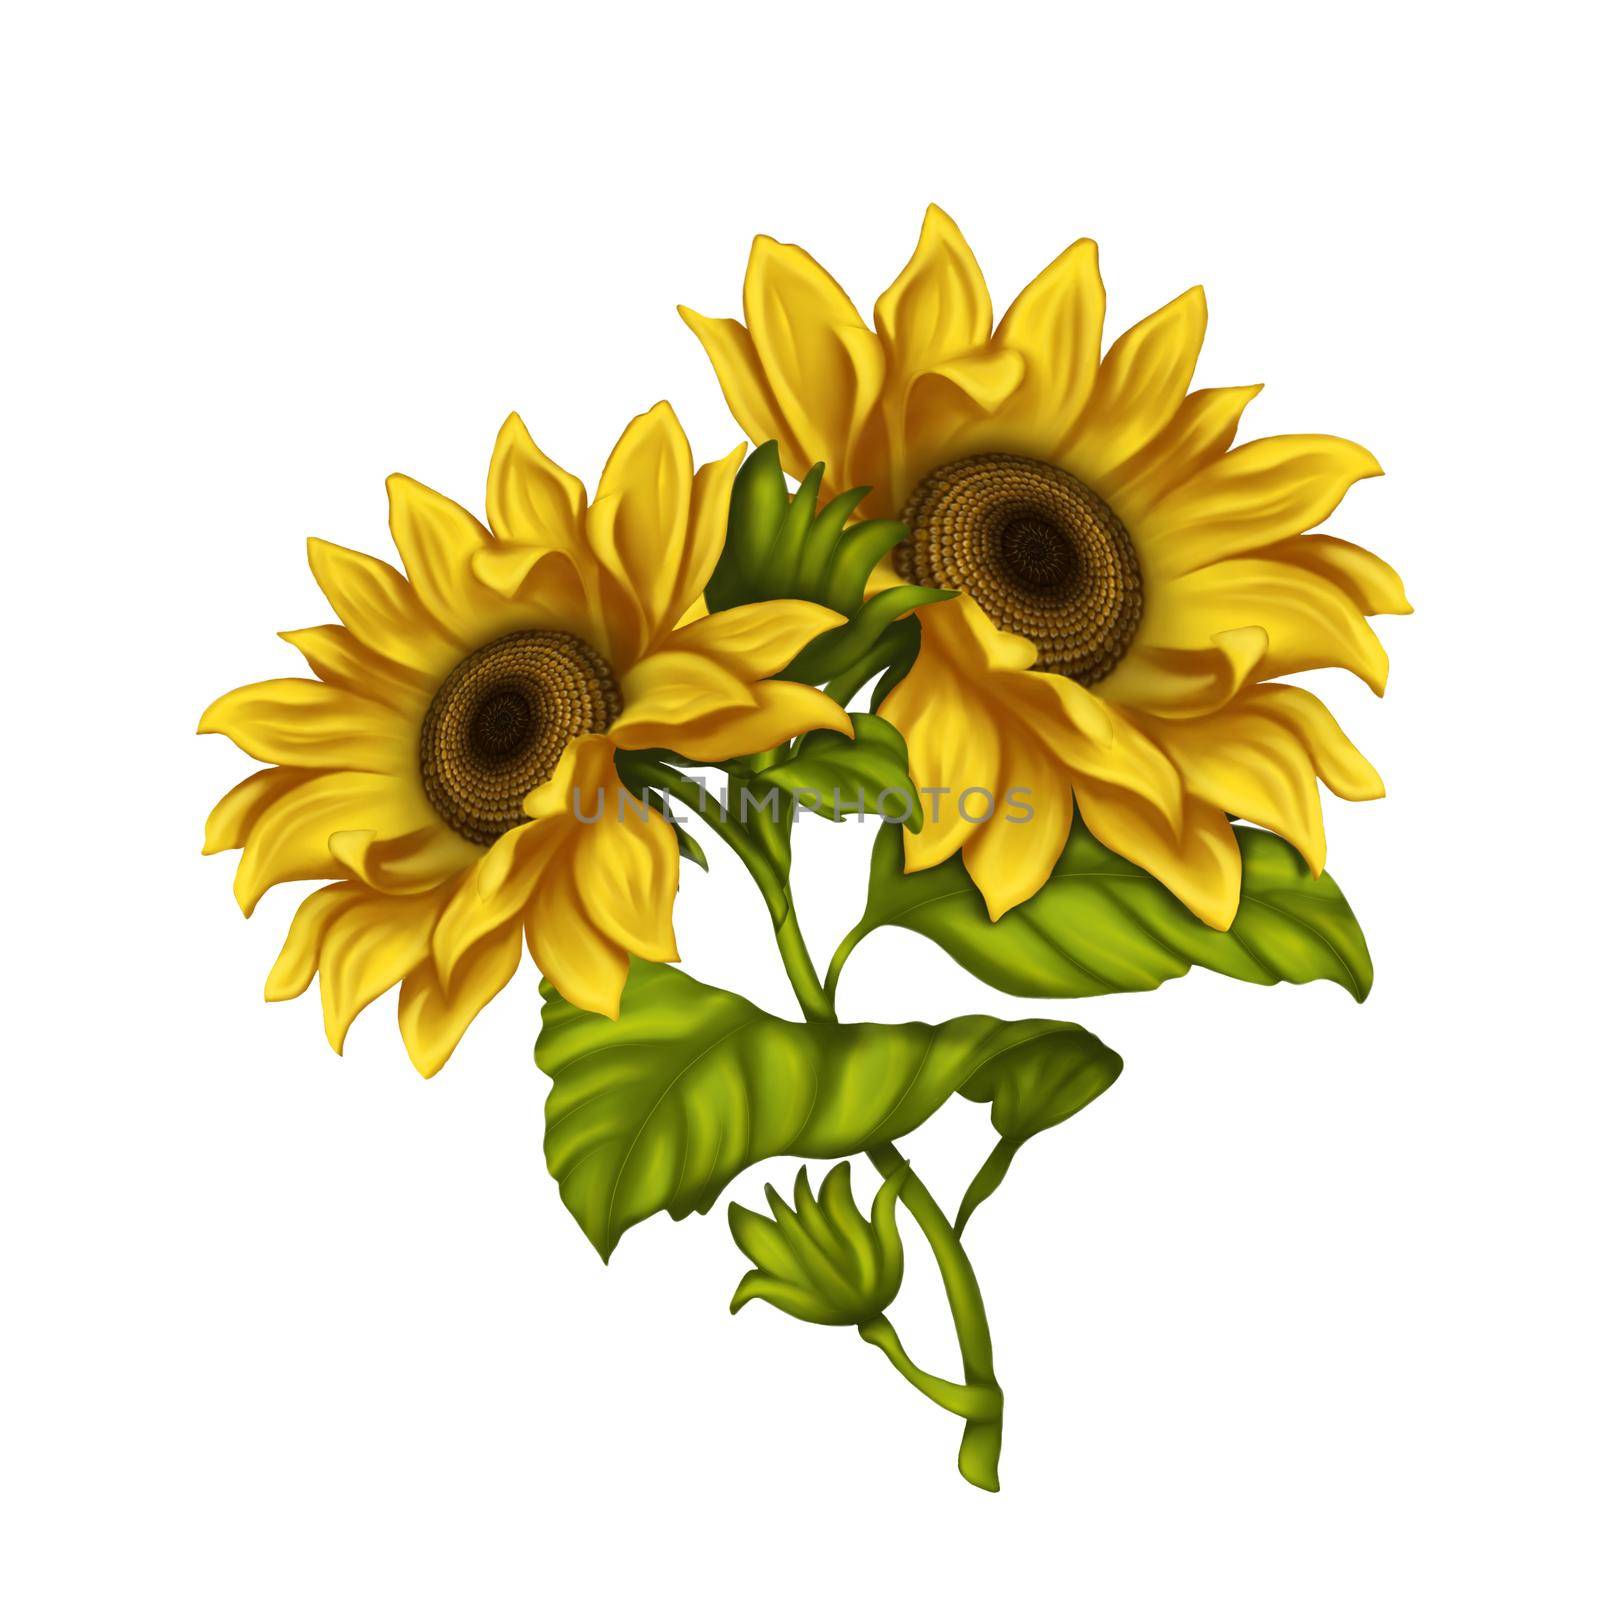 Clipart sunflowers on a white background. Illustration of sunflower flowers. Bright flowers on a light background. Summer.